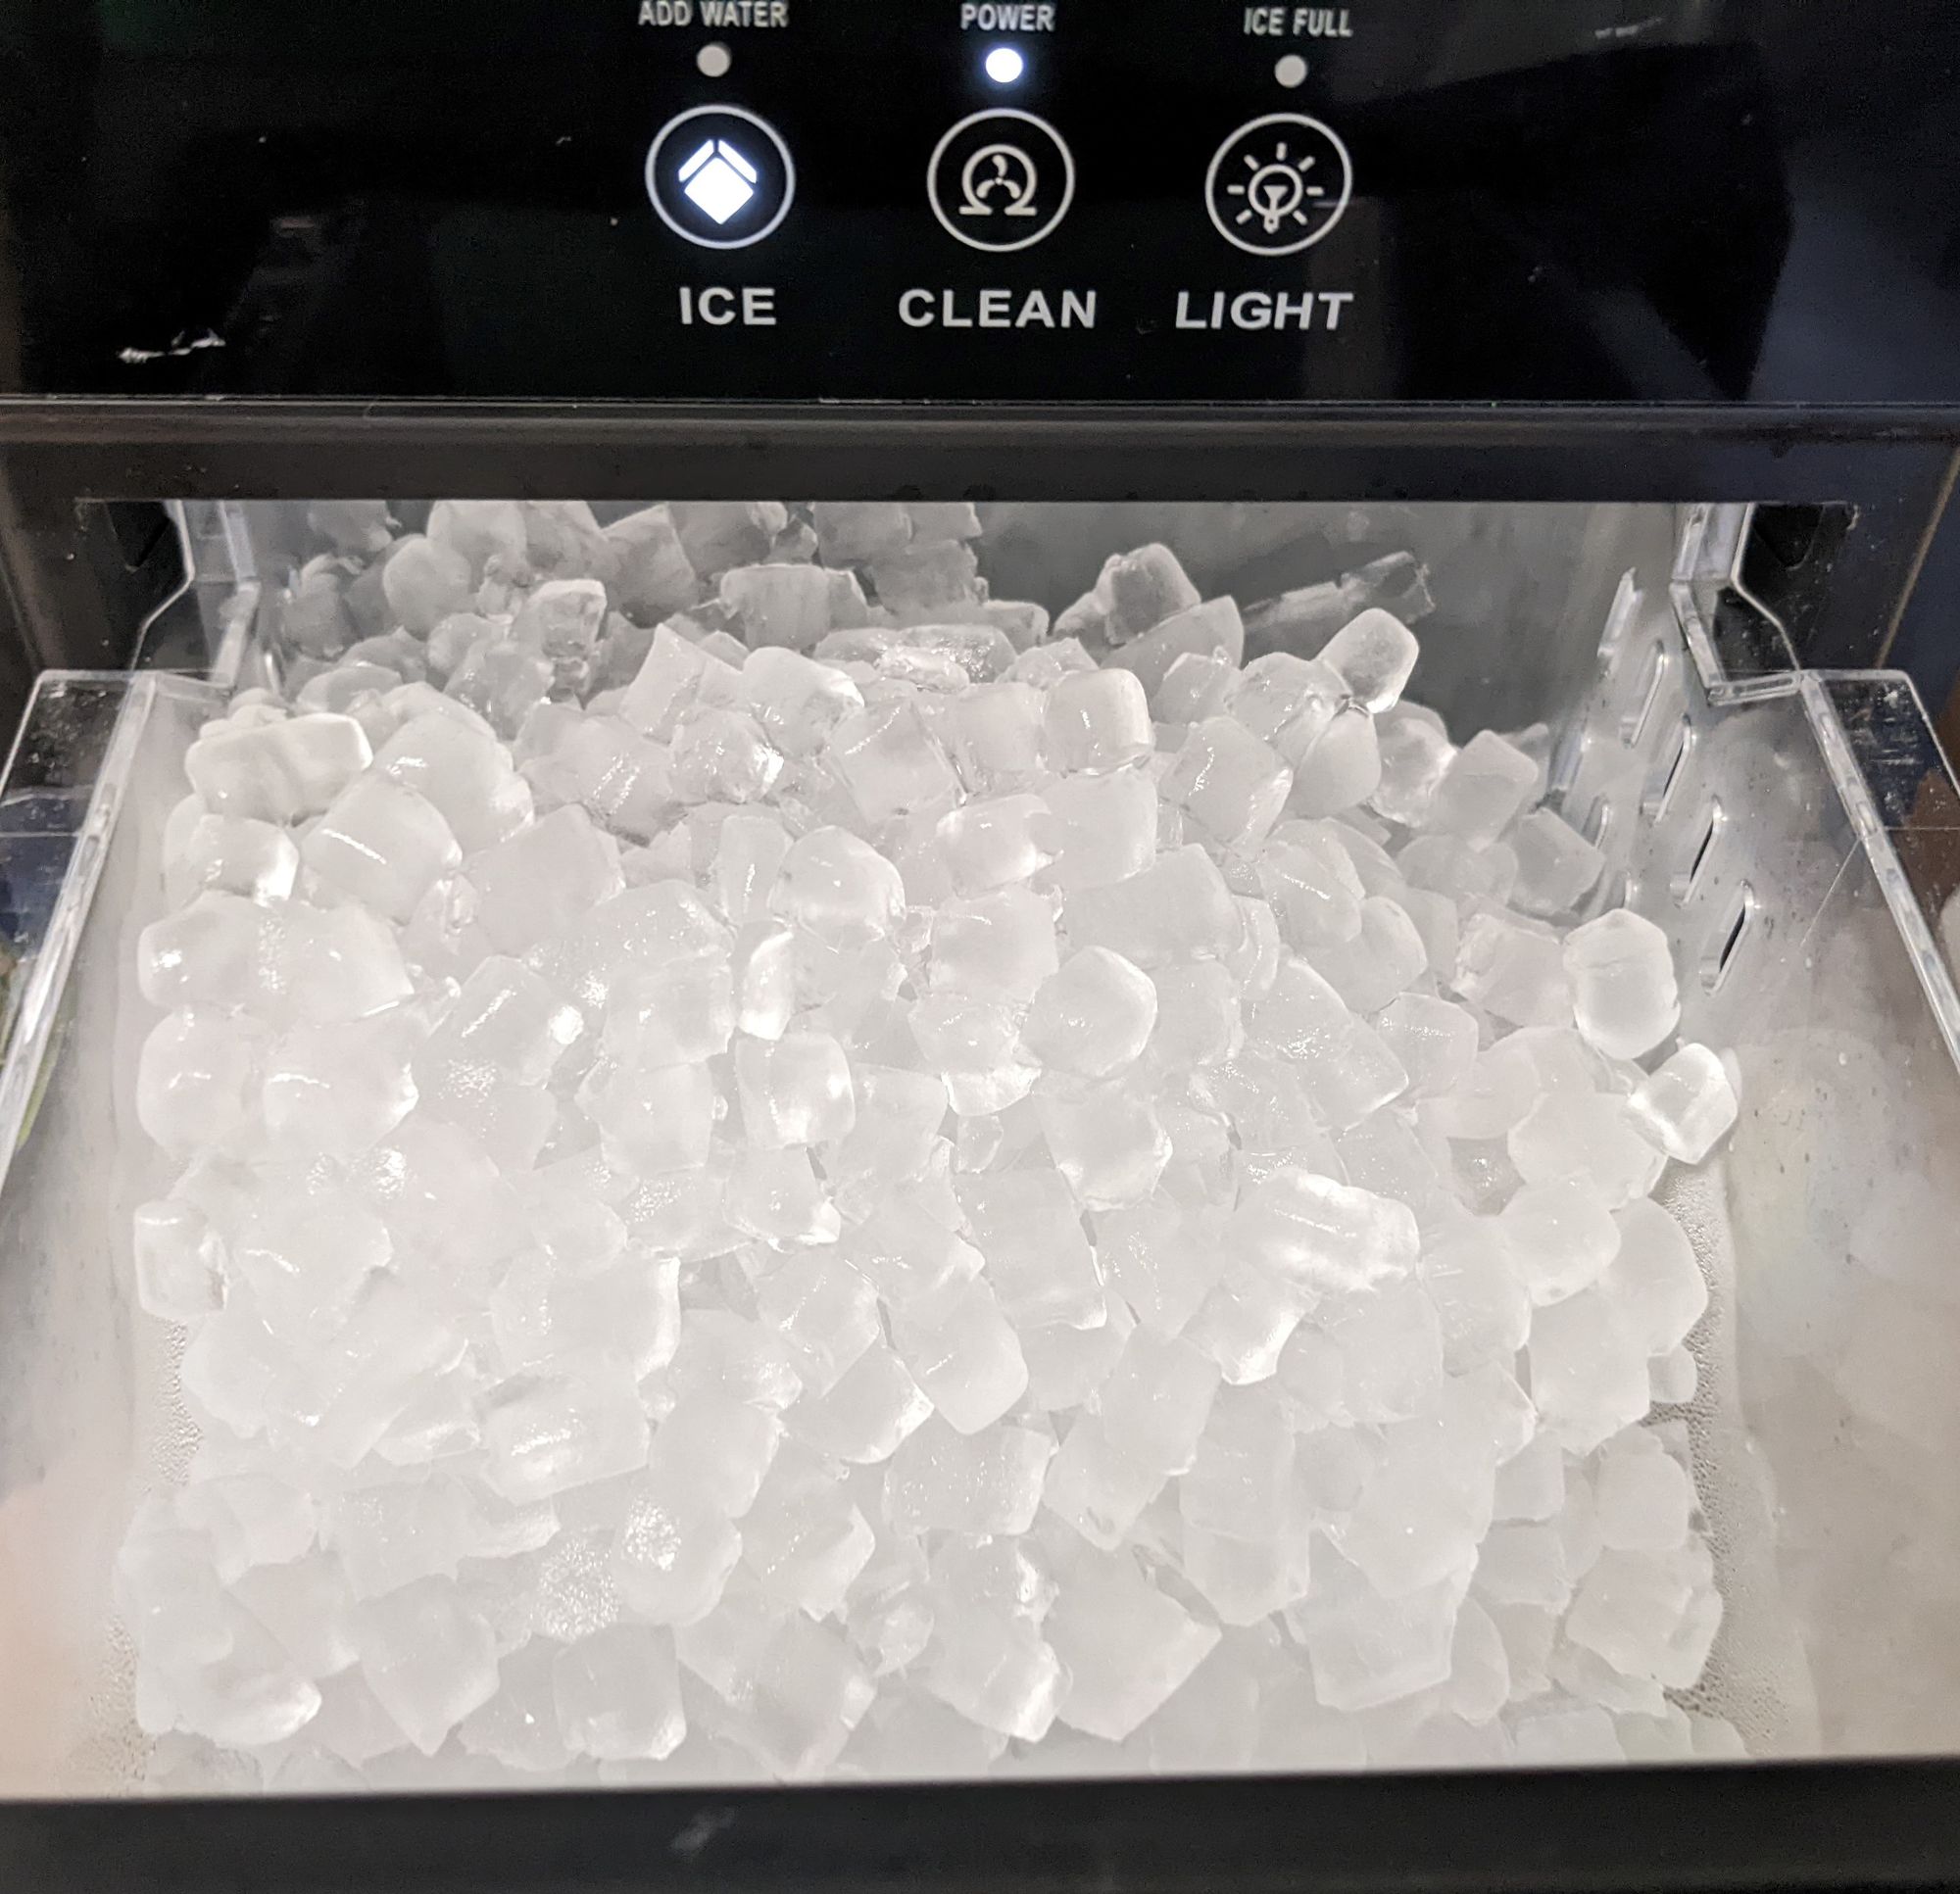 Insignia - 44 lb. Portable Nugget Icemaker with Auto Shut-Off - Stainless Steel